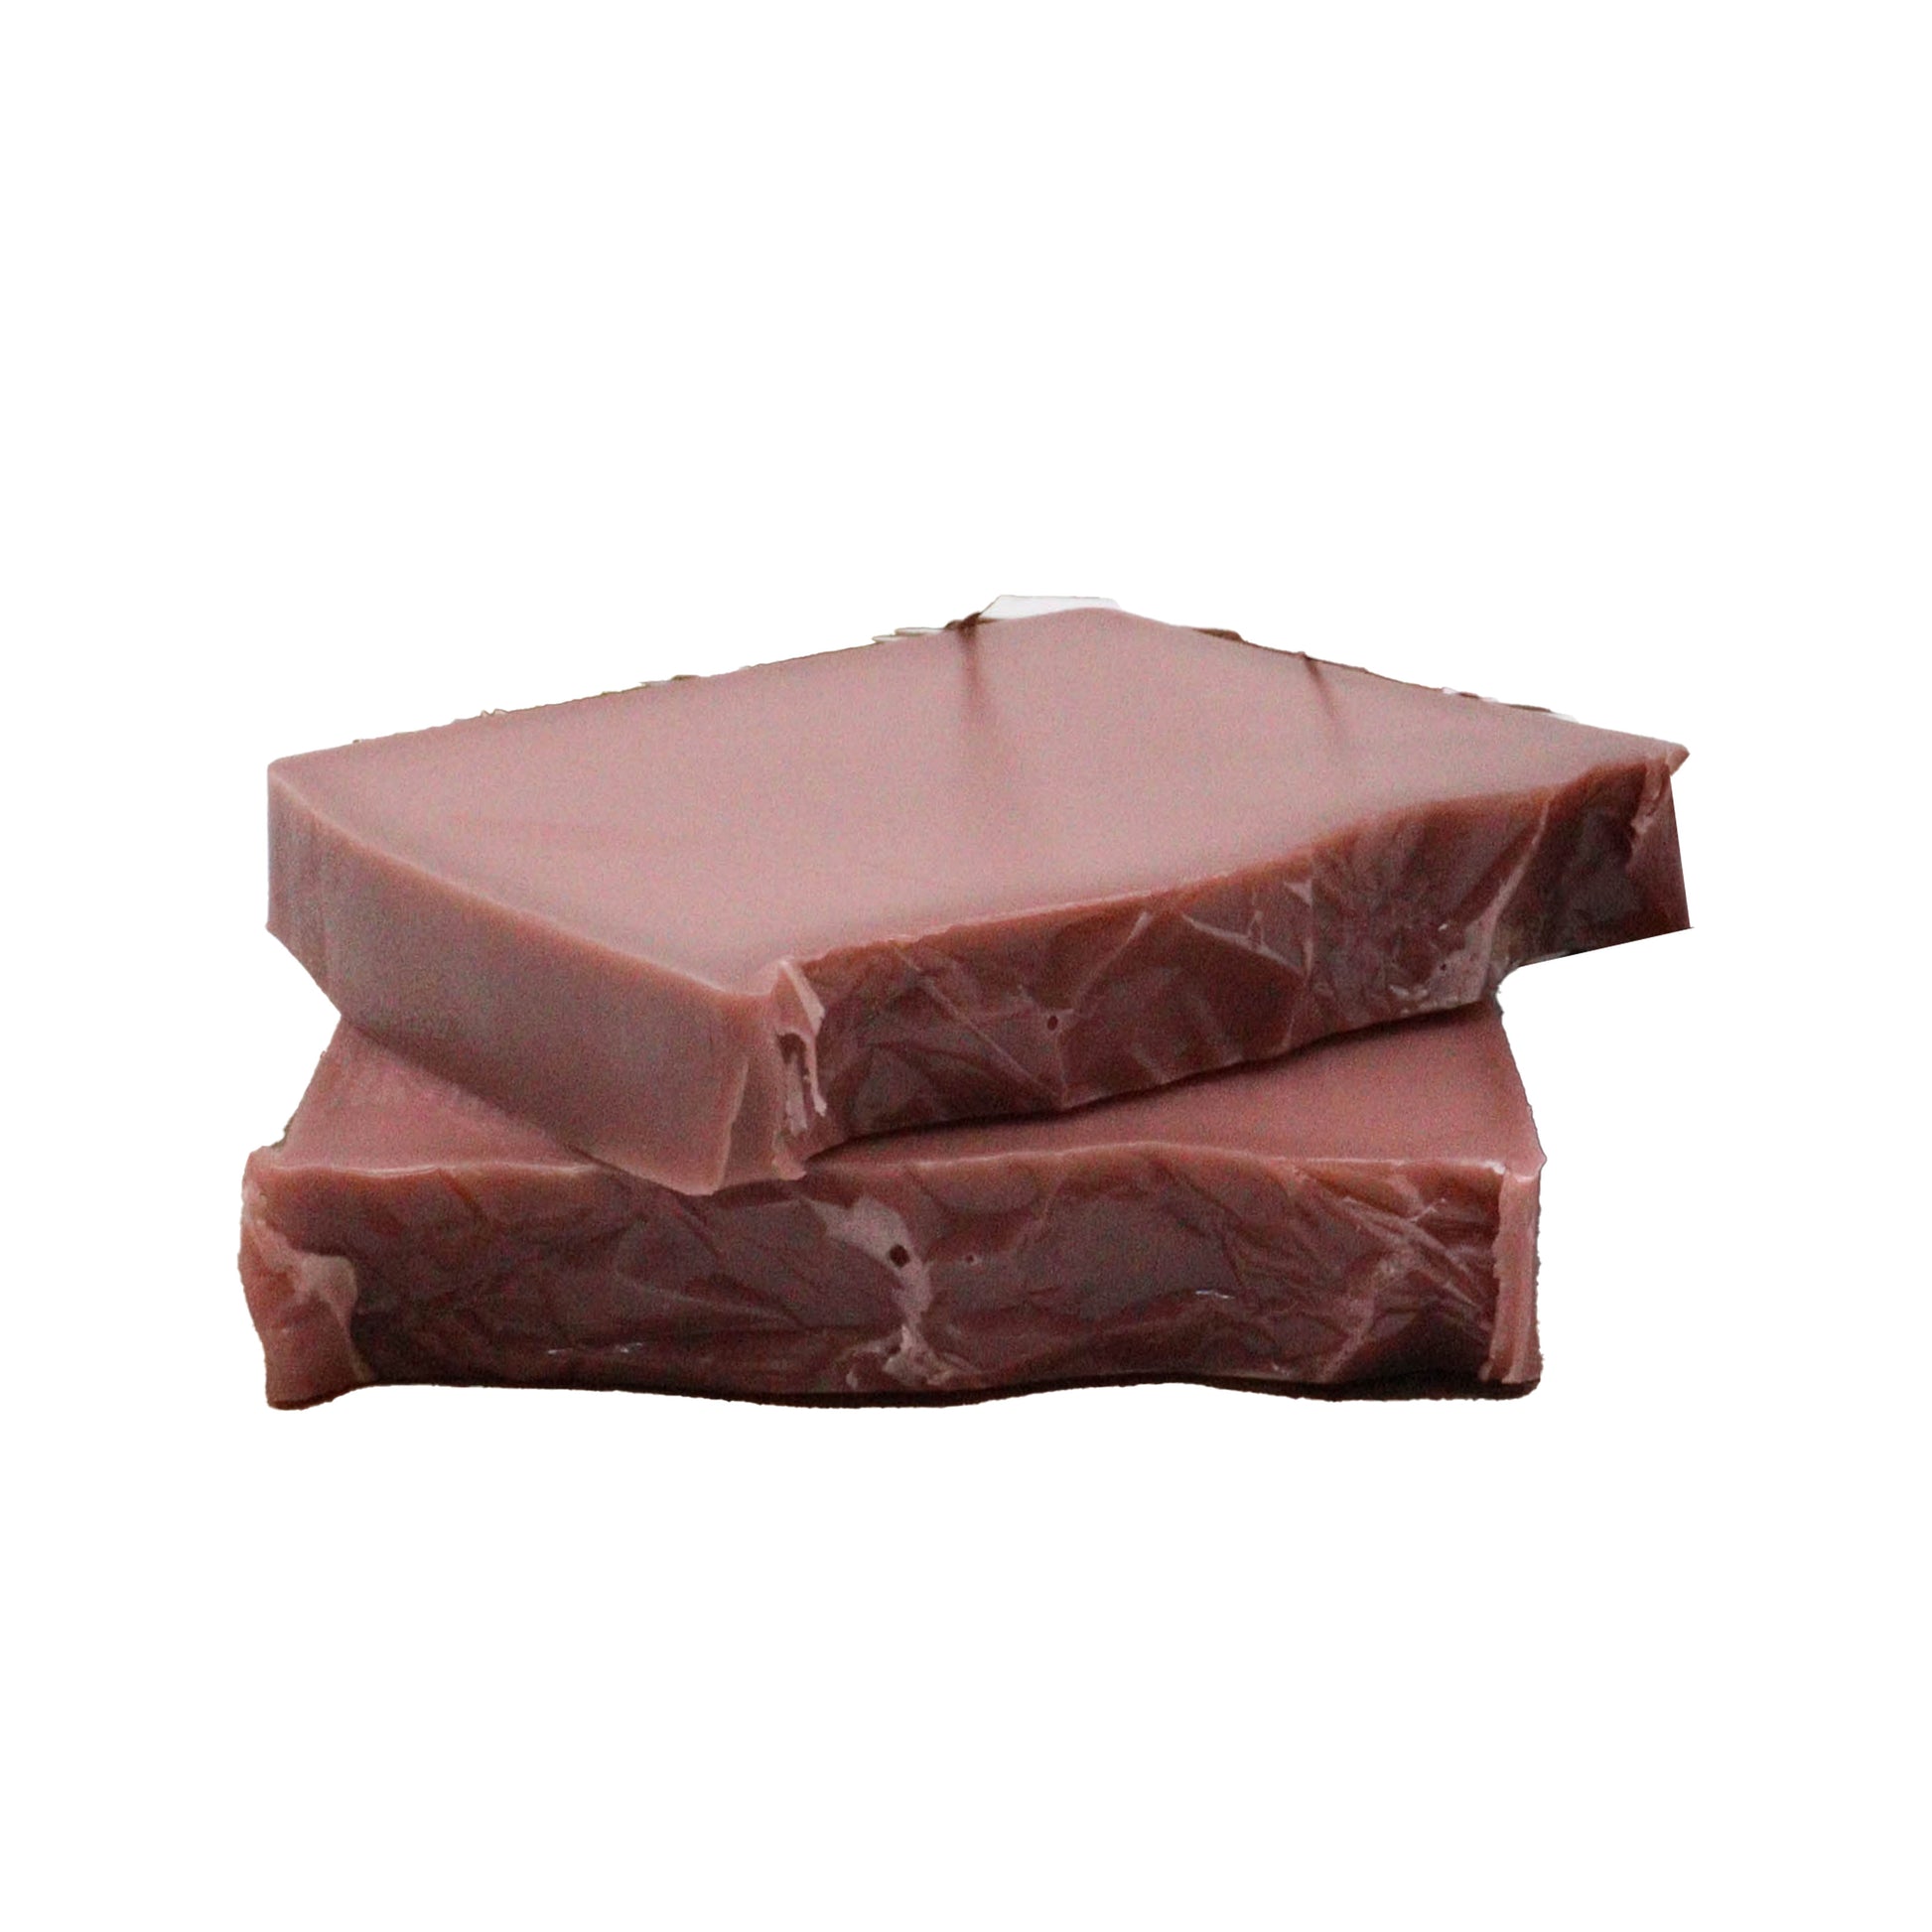 Raspberry Bliss - Artisan Handcrafted Soap - Slice or Loaf - Cosmic Serenity Shop